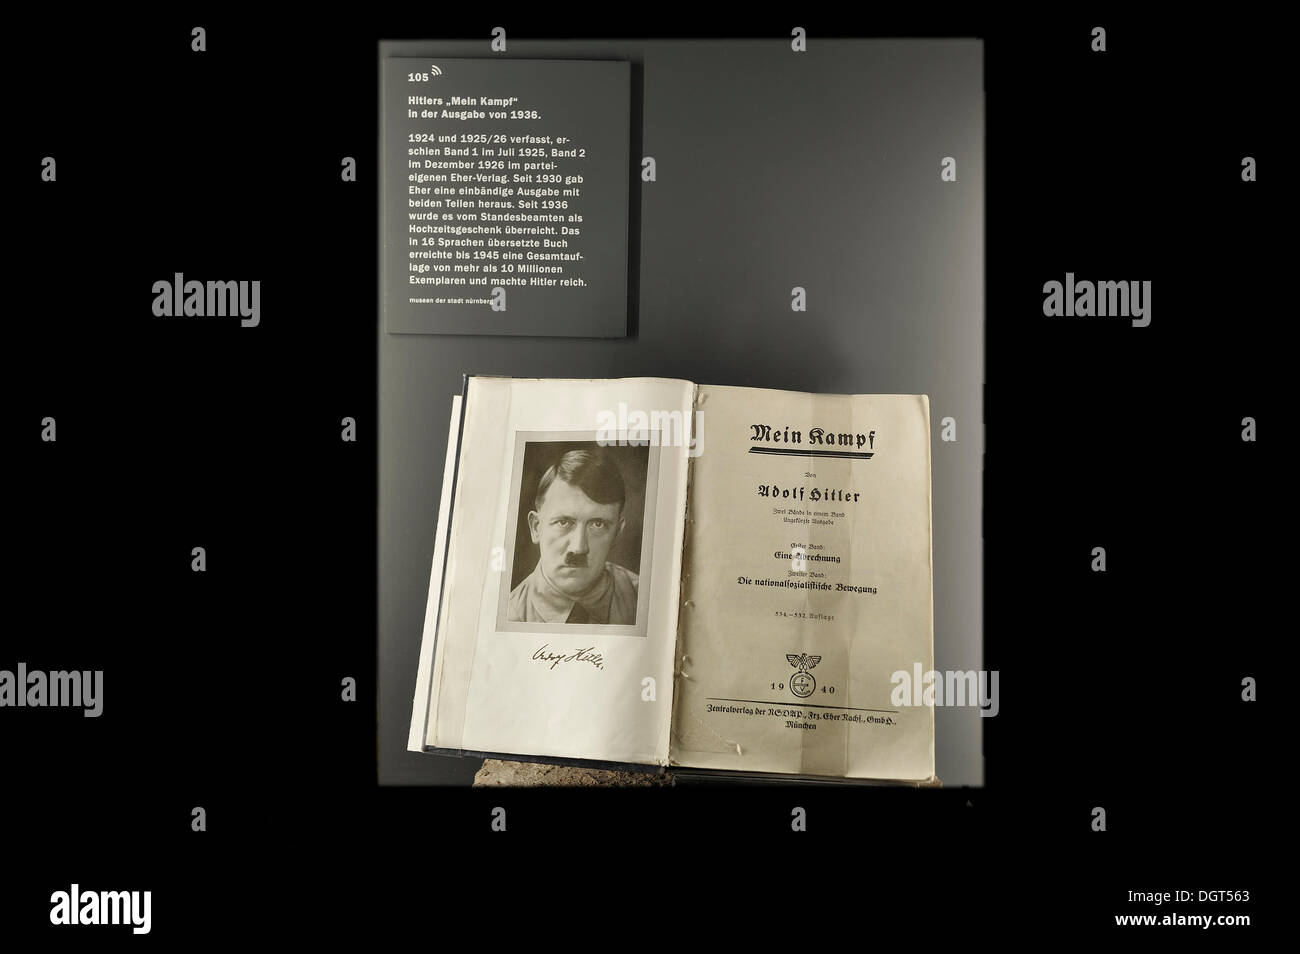 The book 'Mein Kampf', 1936 edition, by Adolf Hitler, part of the permanent exhibition, 'Fascination and Violence', in the Stock Photo